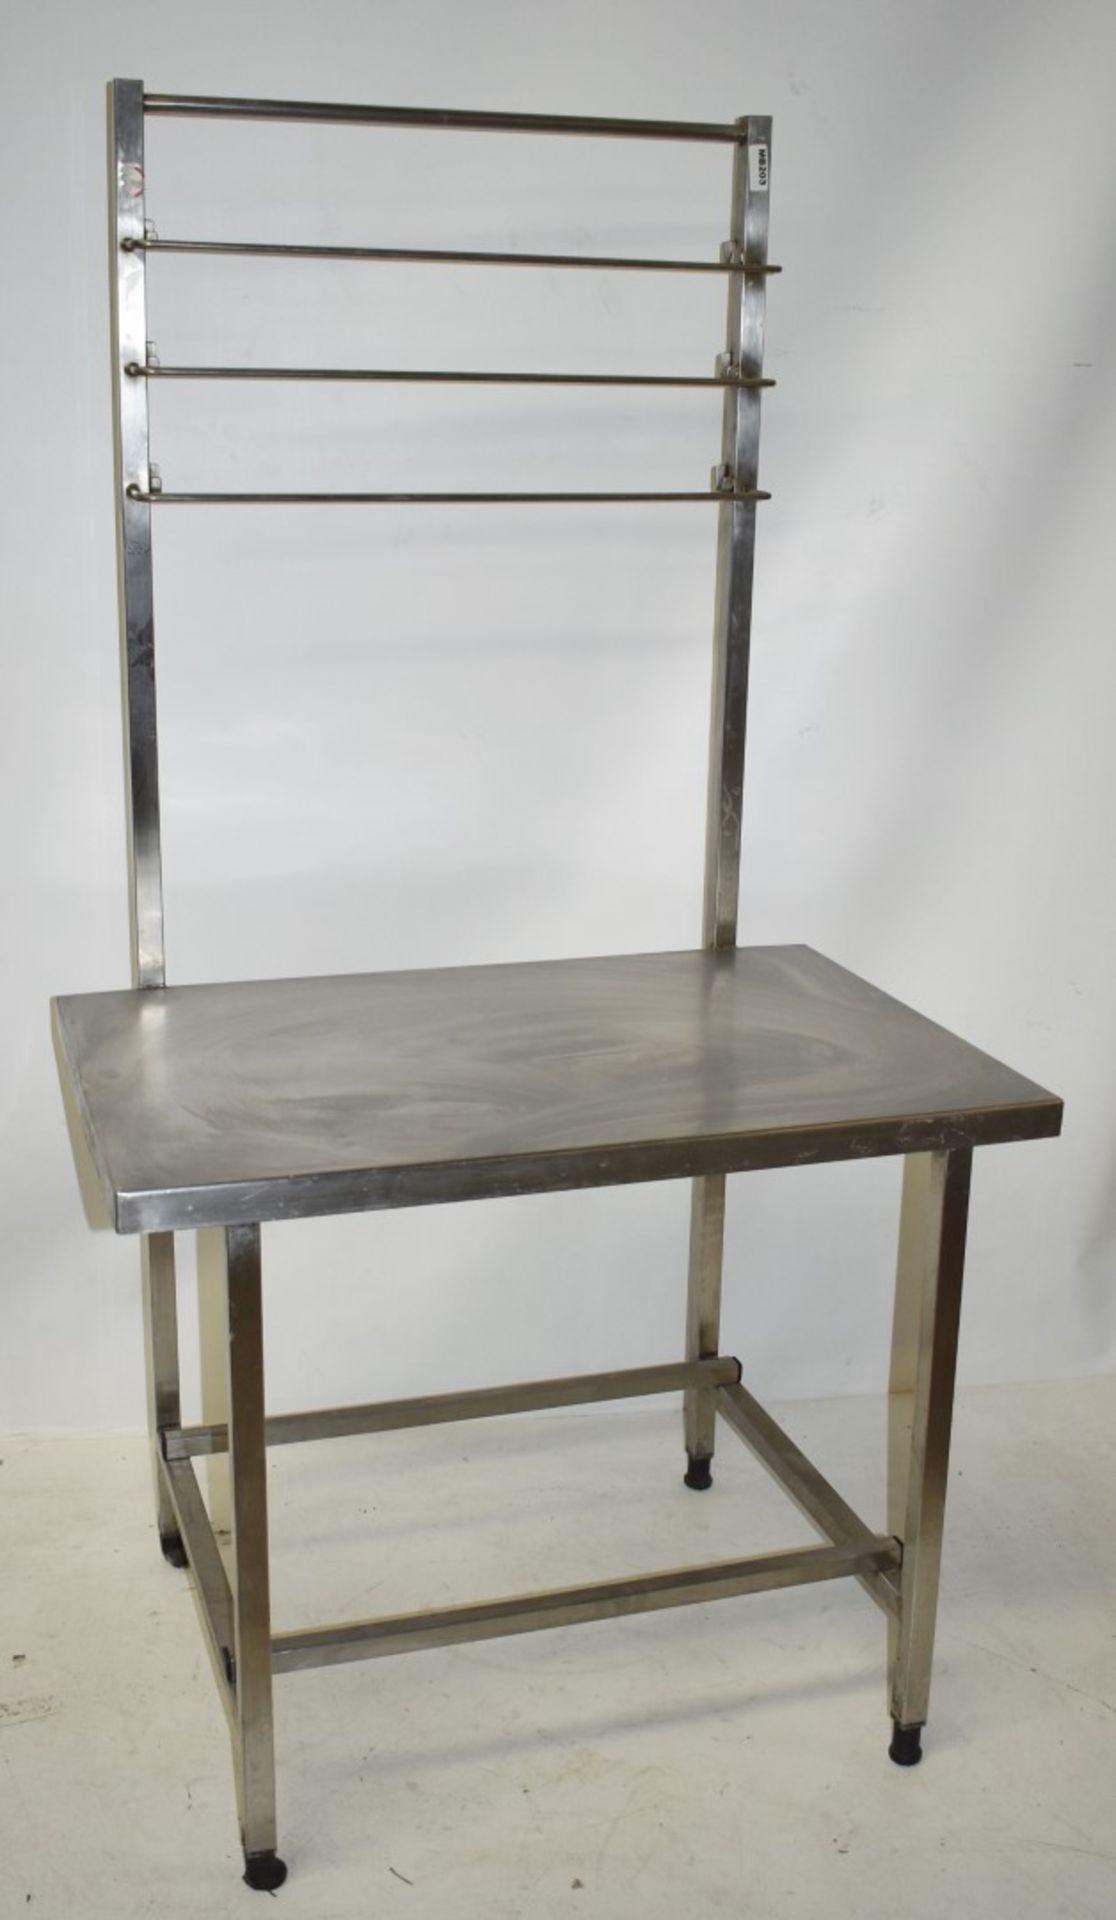 1 x Stainless Steel Prep Bench With Overhead Back Rails - H96/157 x W140 x D65 cms - CL453 - Ref